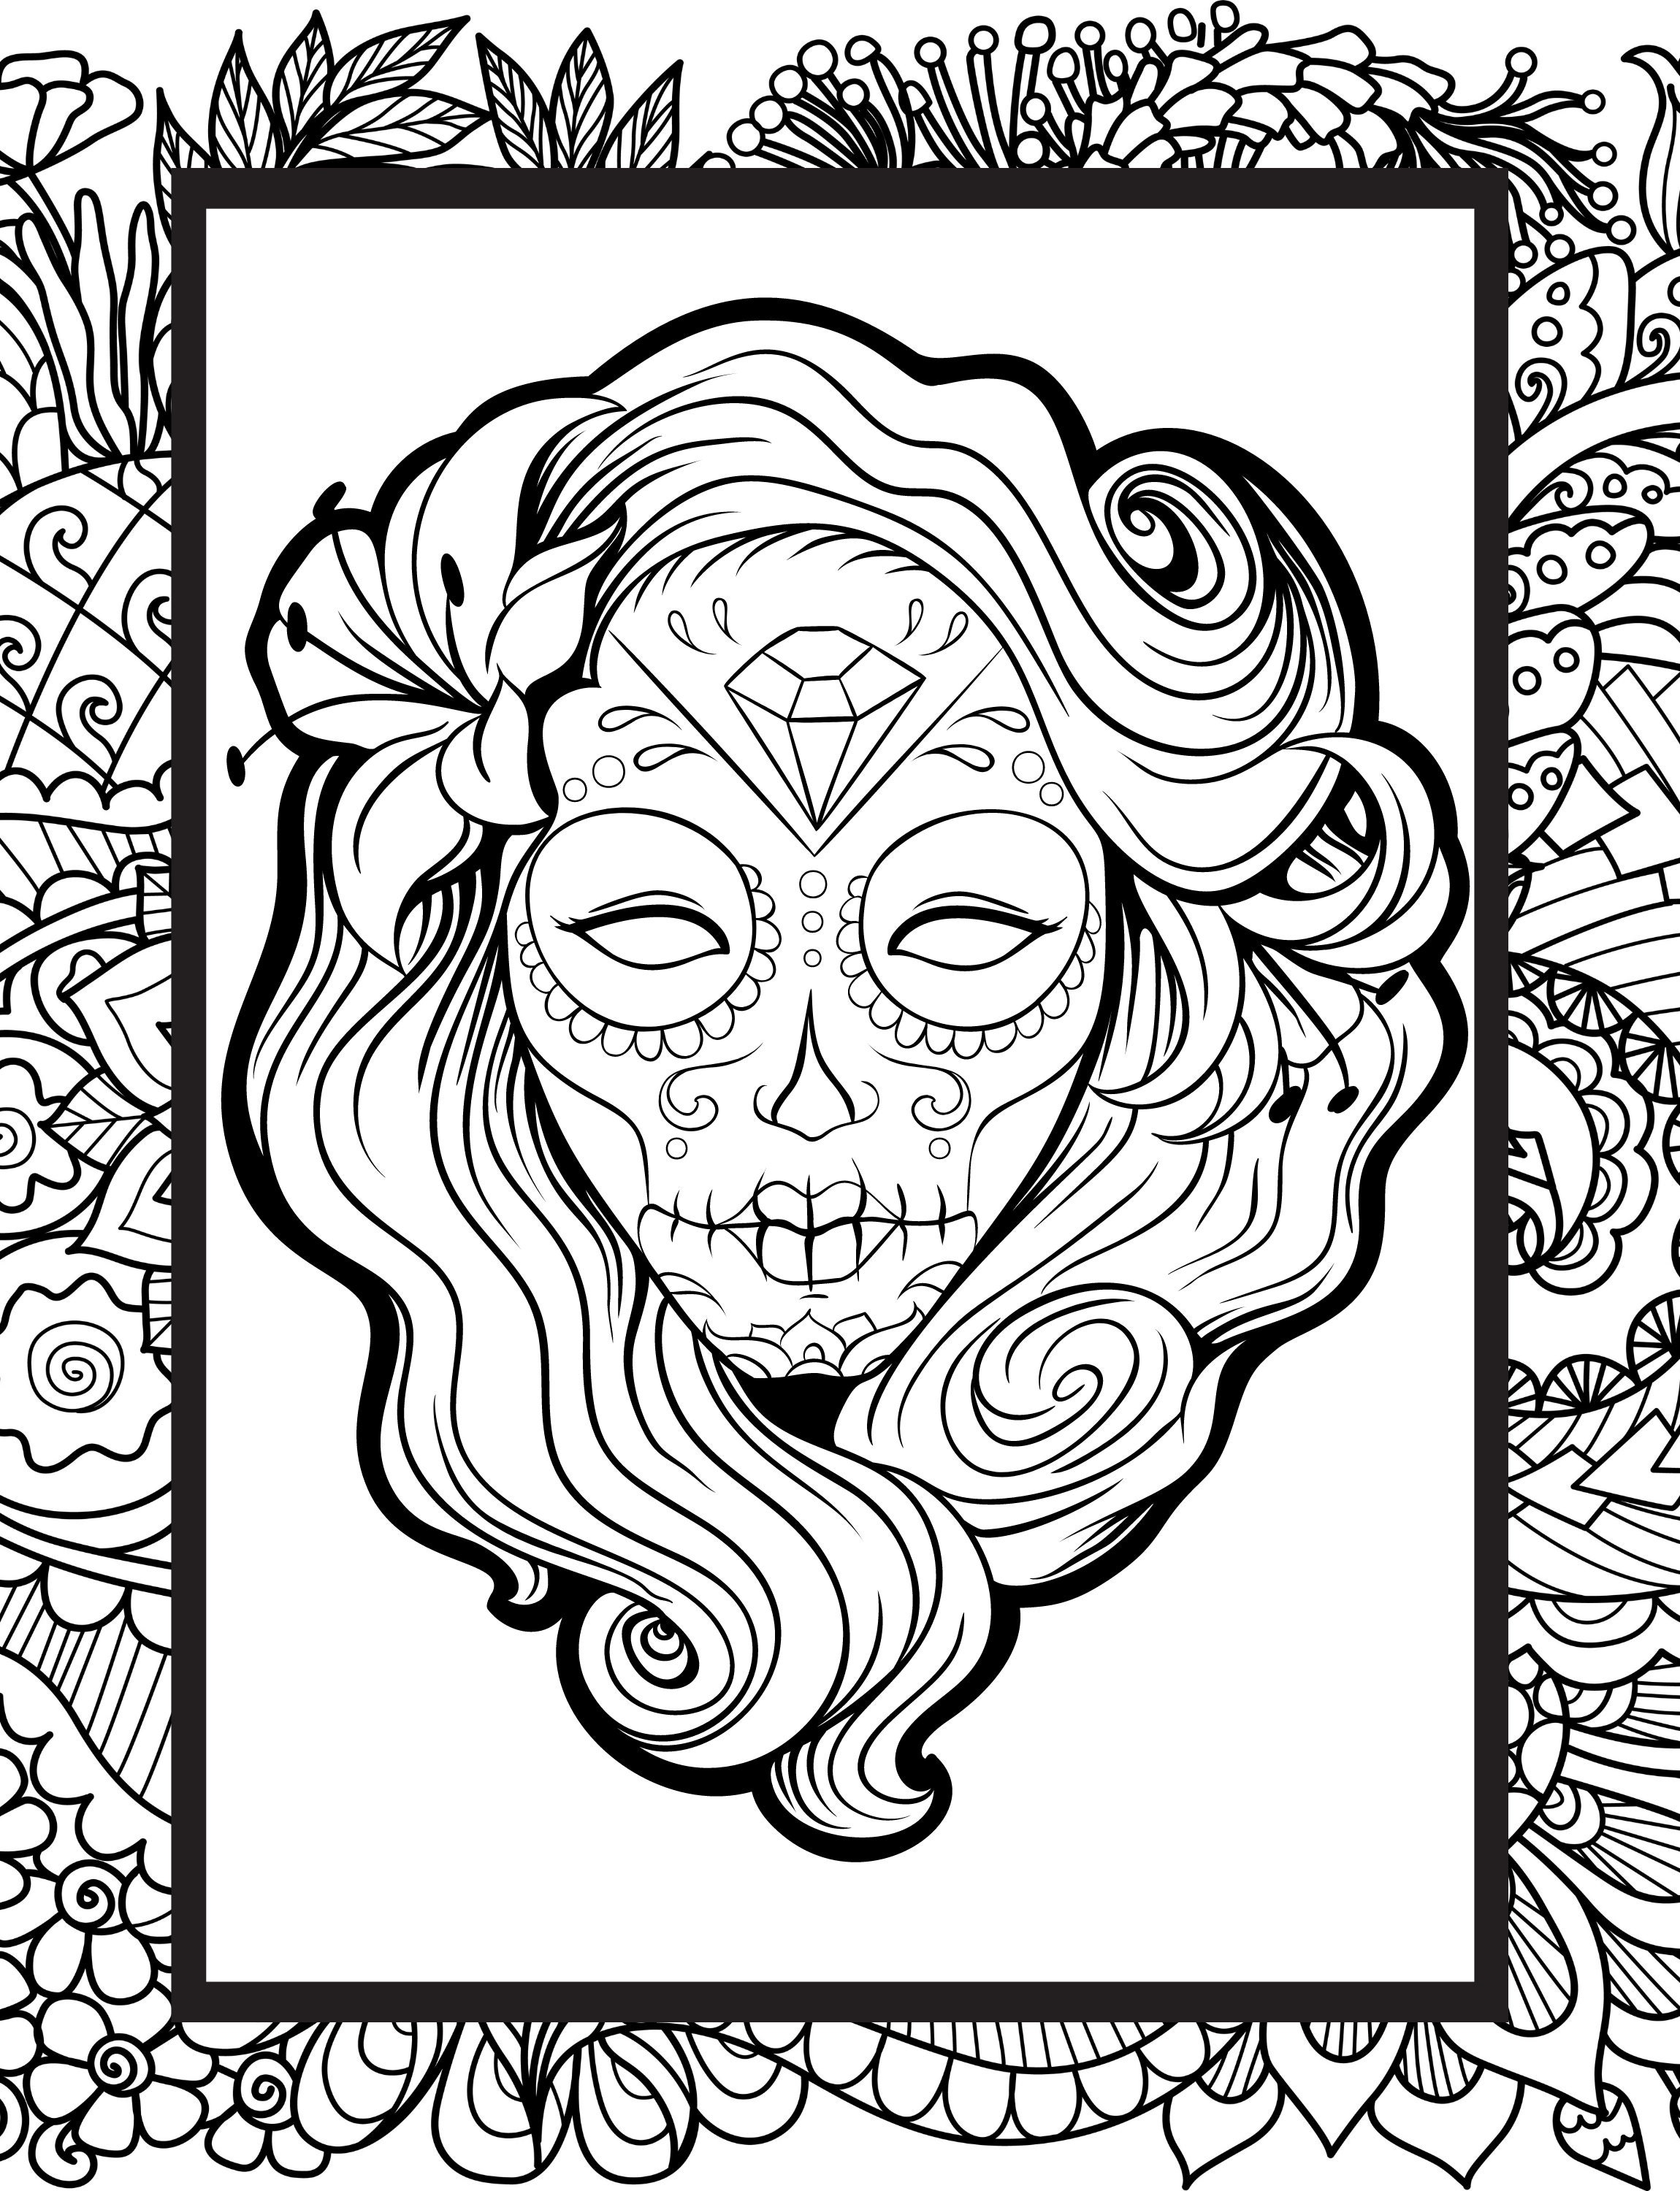 Day of the dead mexican skull color page female sugar skull coloring page for adults halloween free download print x at home